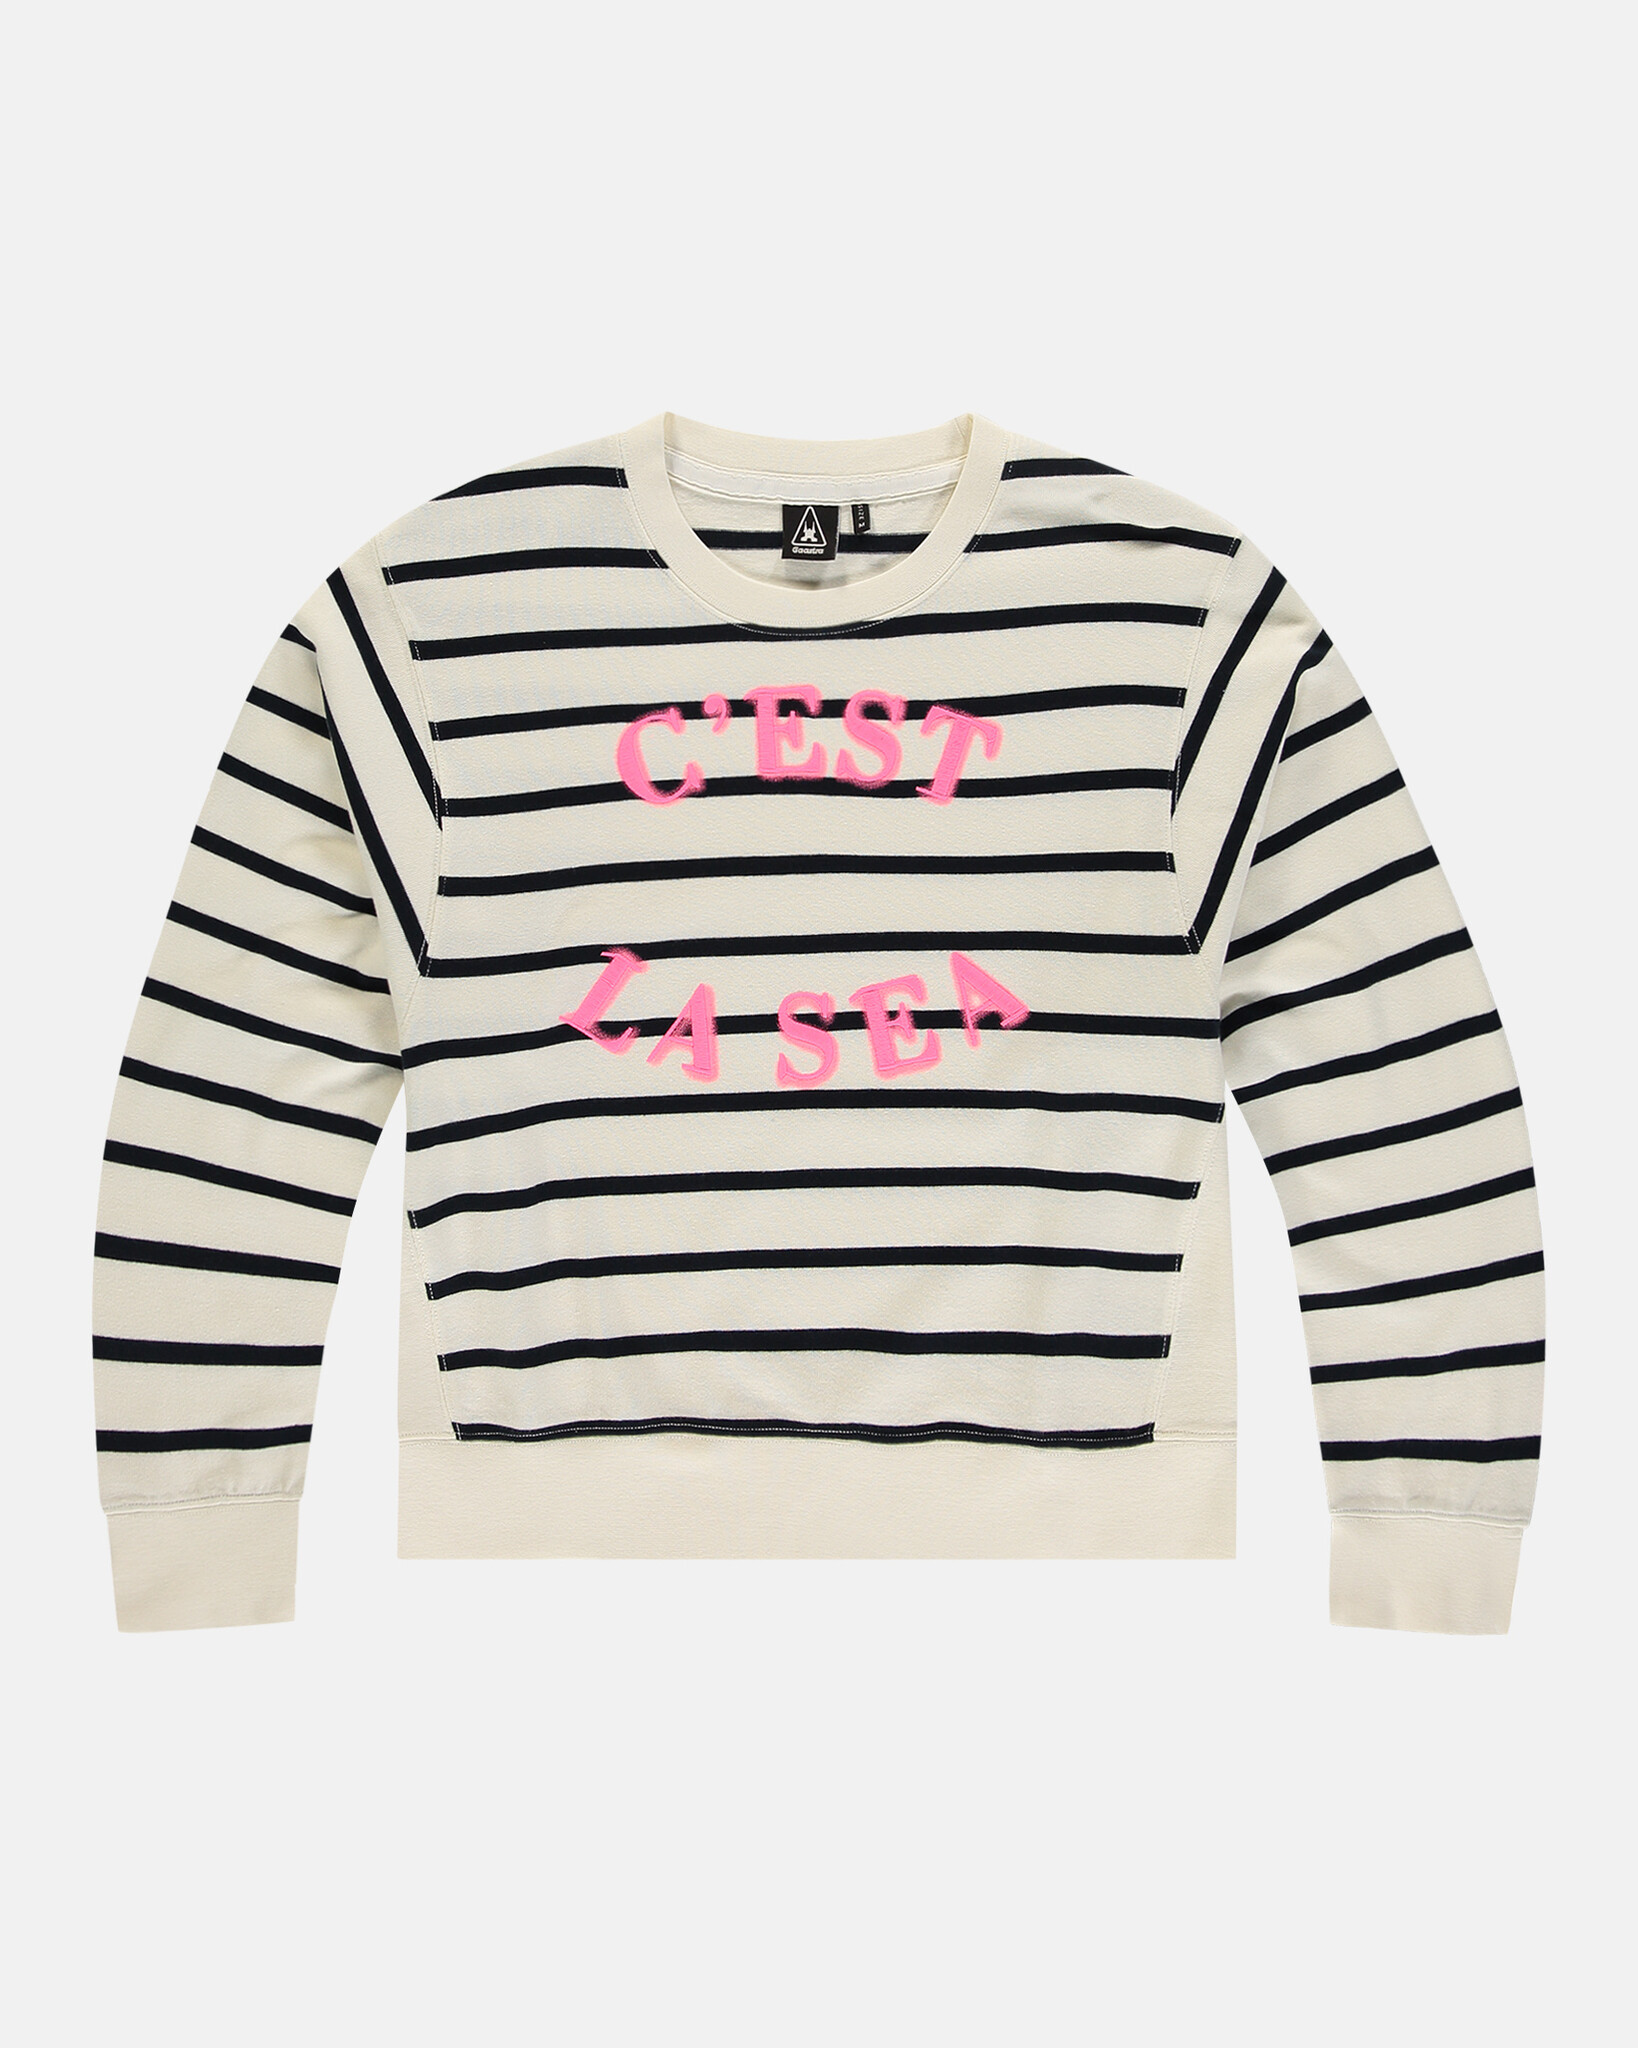 yarn dyed stripe heavy jersey round neck sweater with dropped shoulders and eye catching artwork